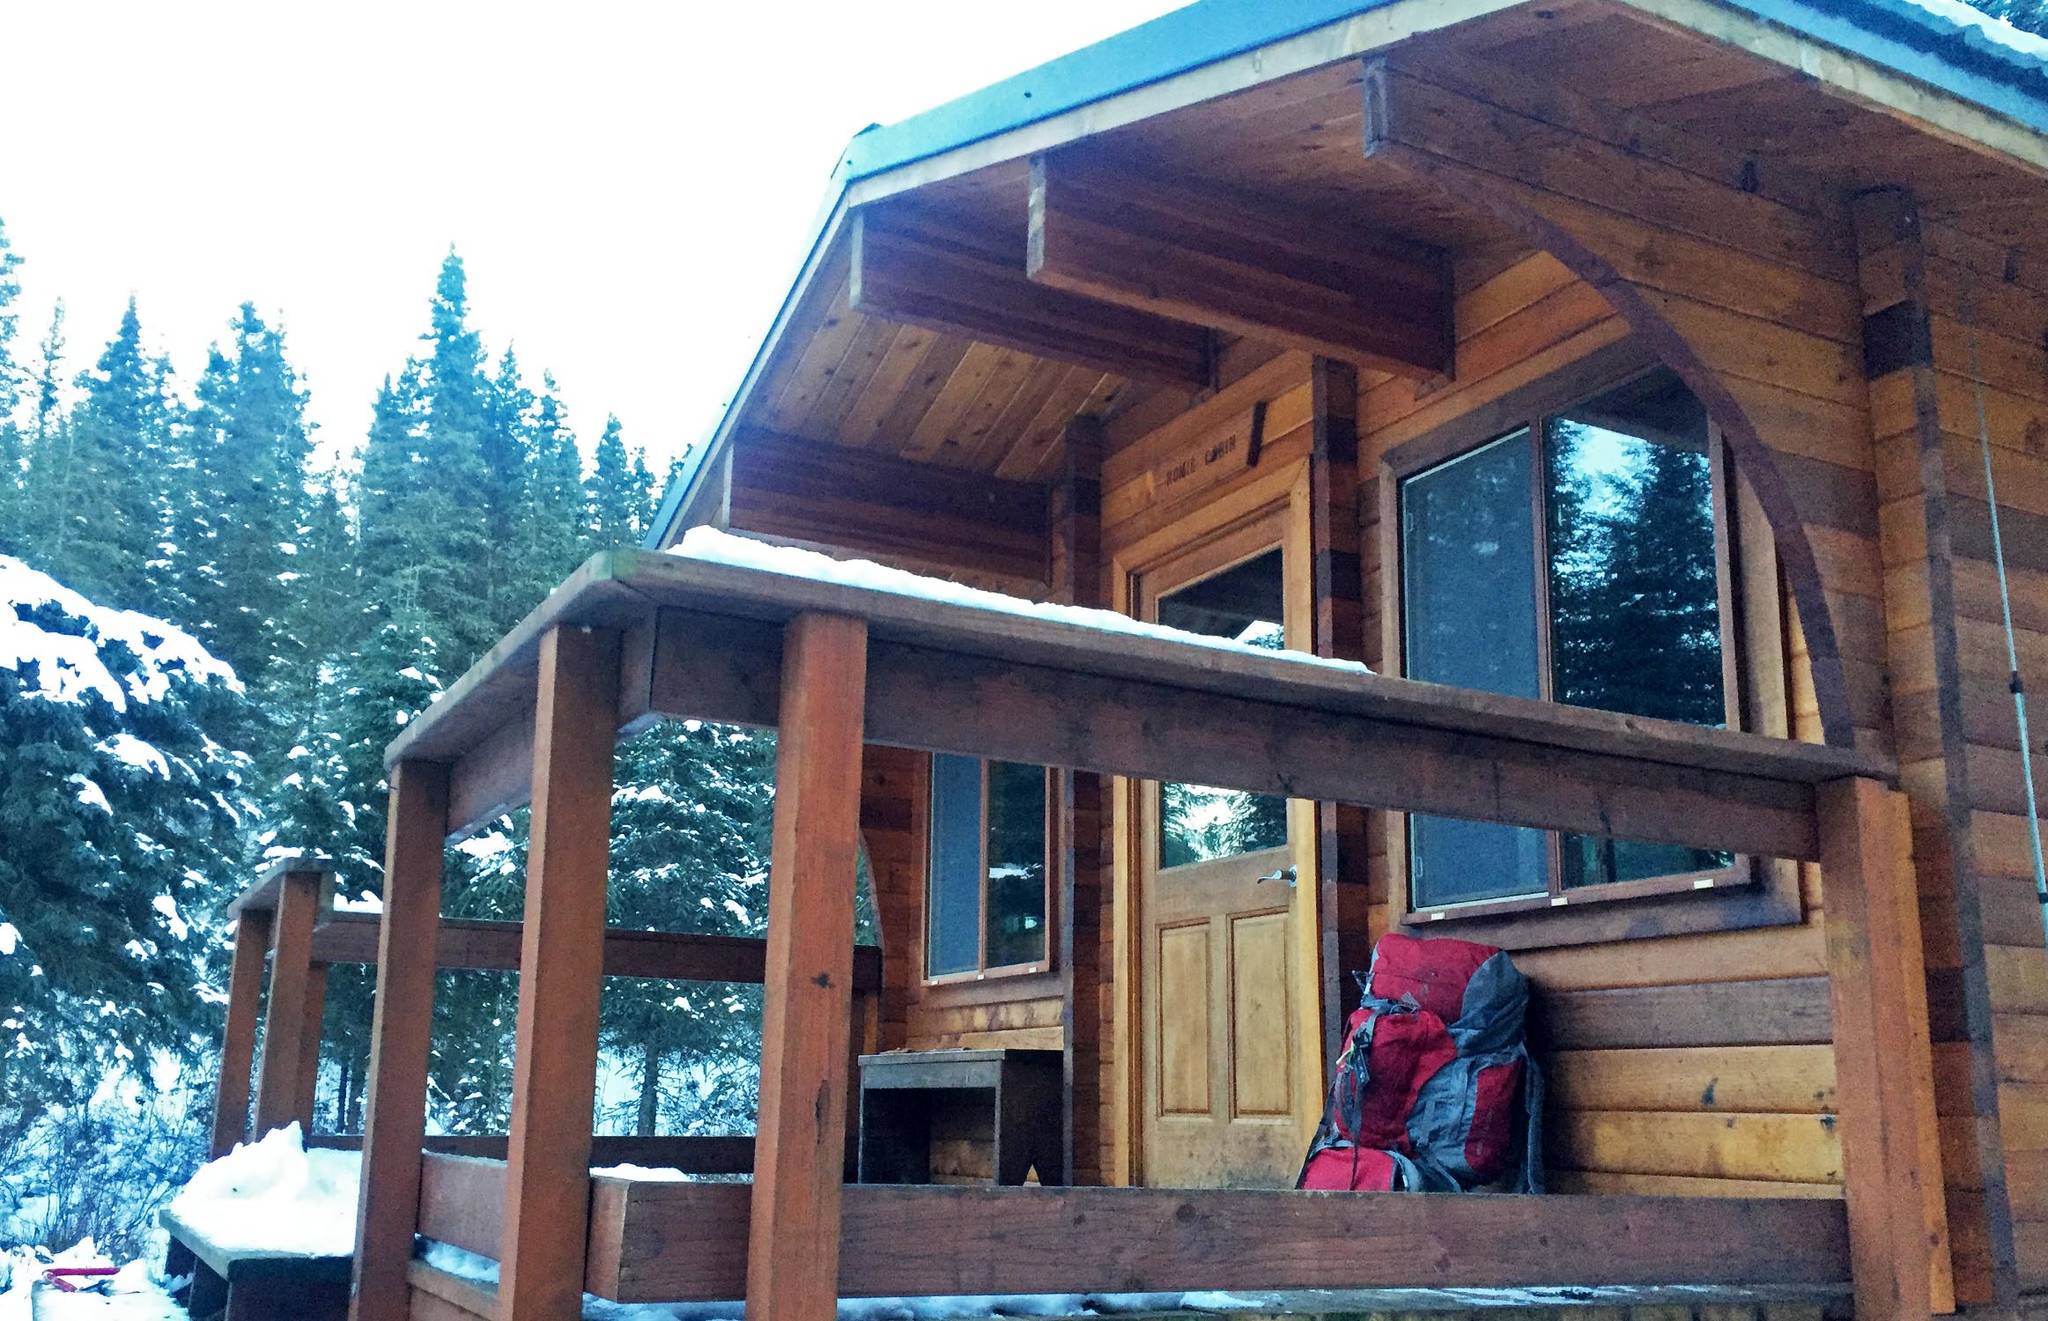 This November 2017 photo shows the Romig Cabin at the south end of Juneau Lake on the Resurrection Pass Trail near Cooper Landing, Alaska. Romig Cabin is one of an extensive system of federal- and state-owned public use cabins on park lands across the state of Alaska. (Photo by Elizabeth Earl/Peninsula Clarion)